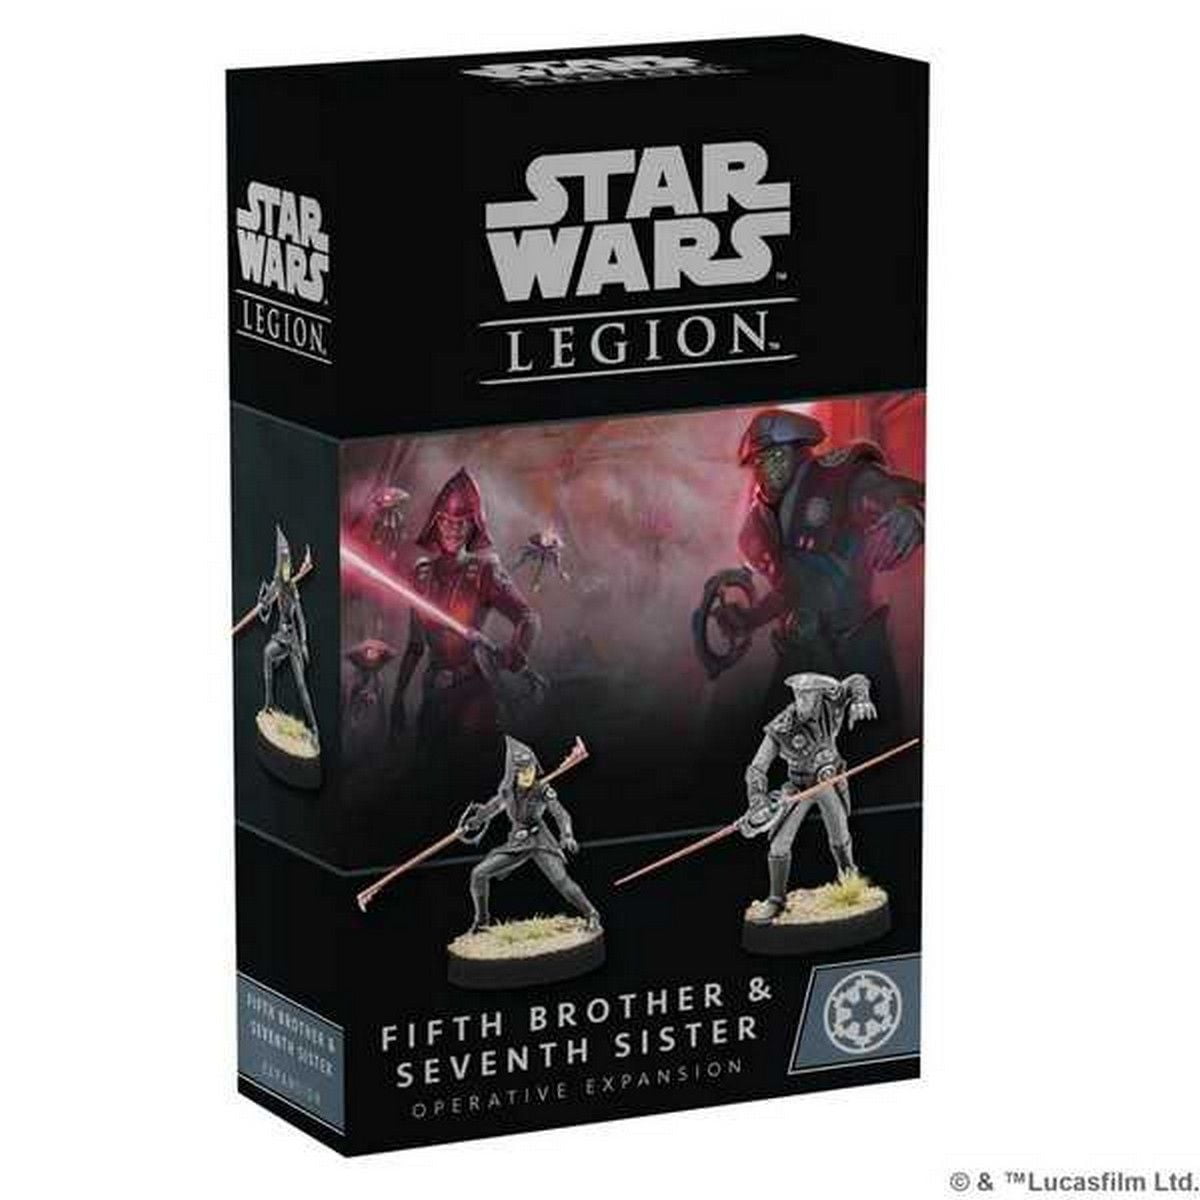 Star Wars Legion: Fifth Brother and Seventh Sister - Operative Expansion